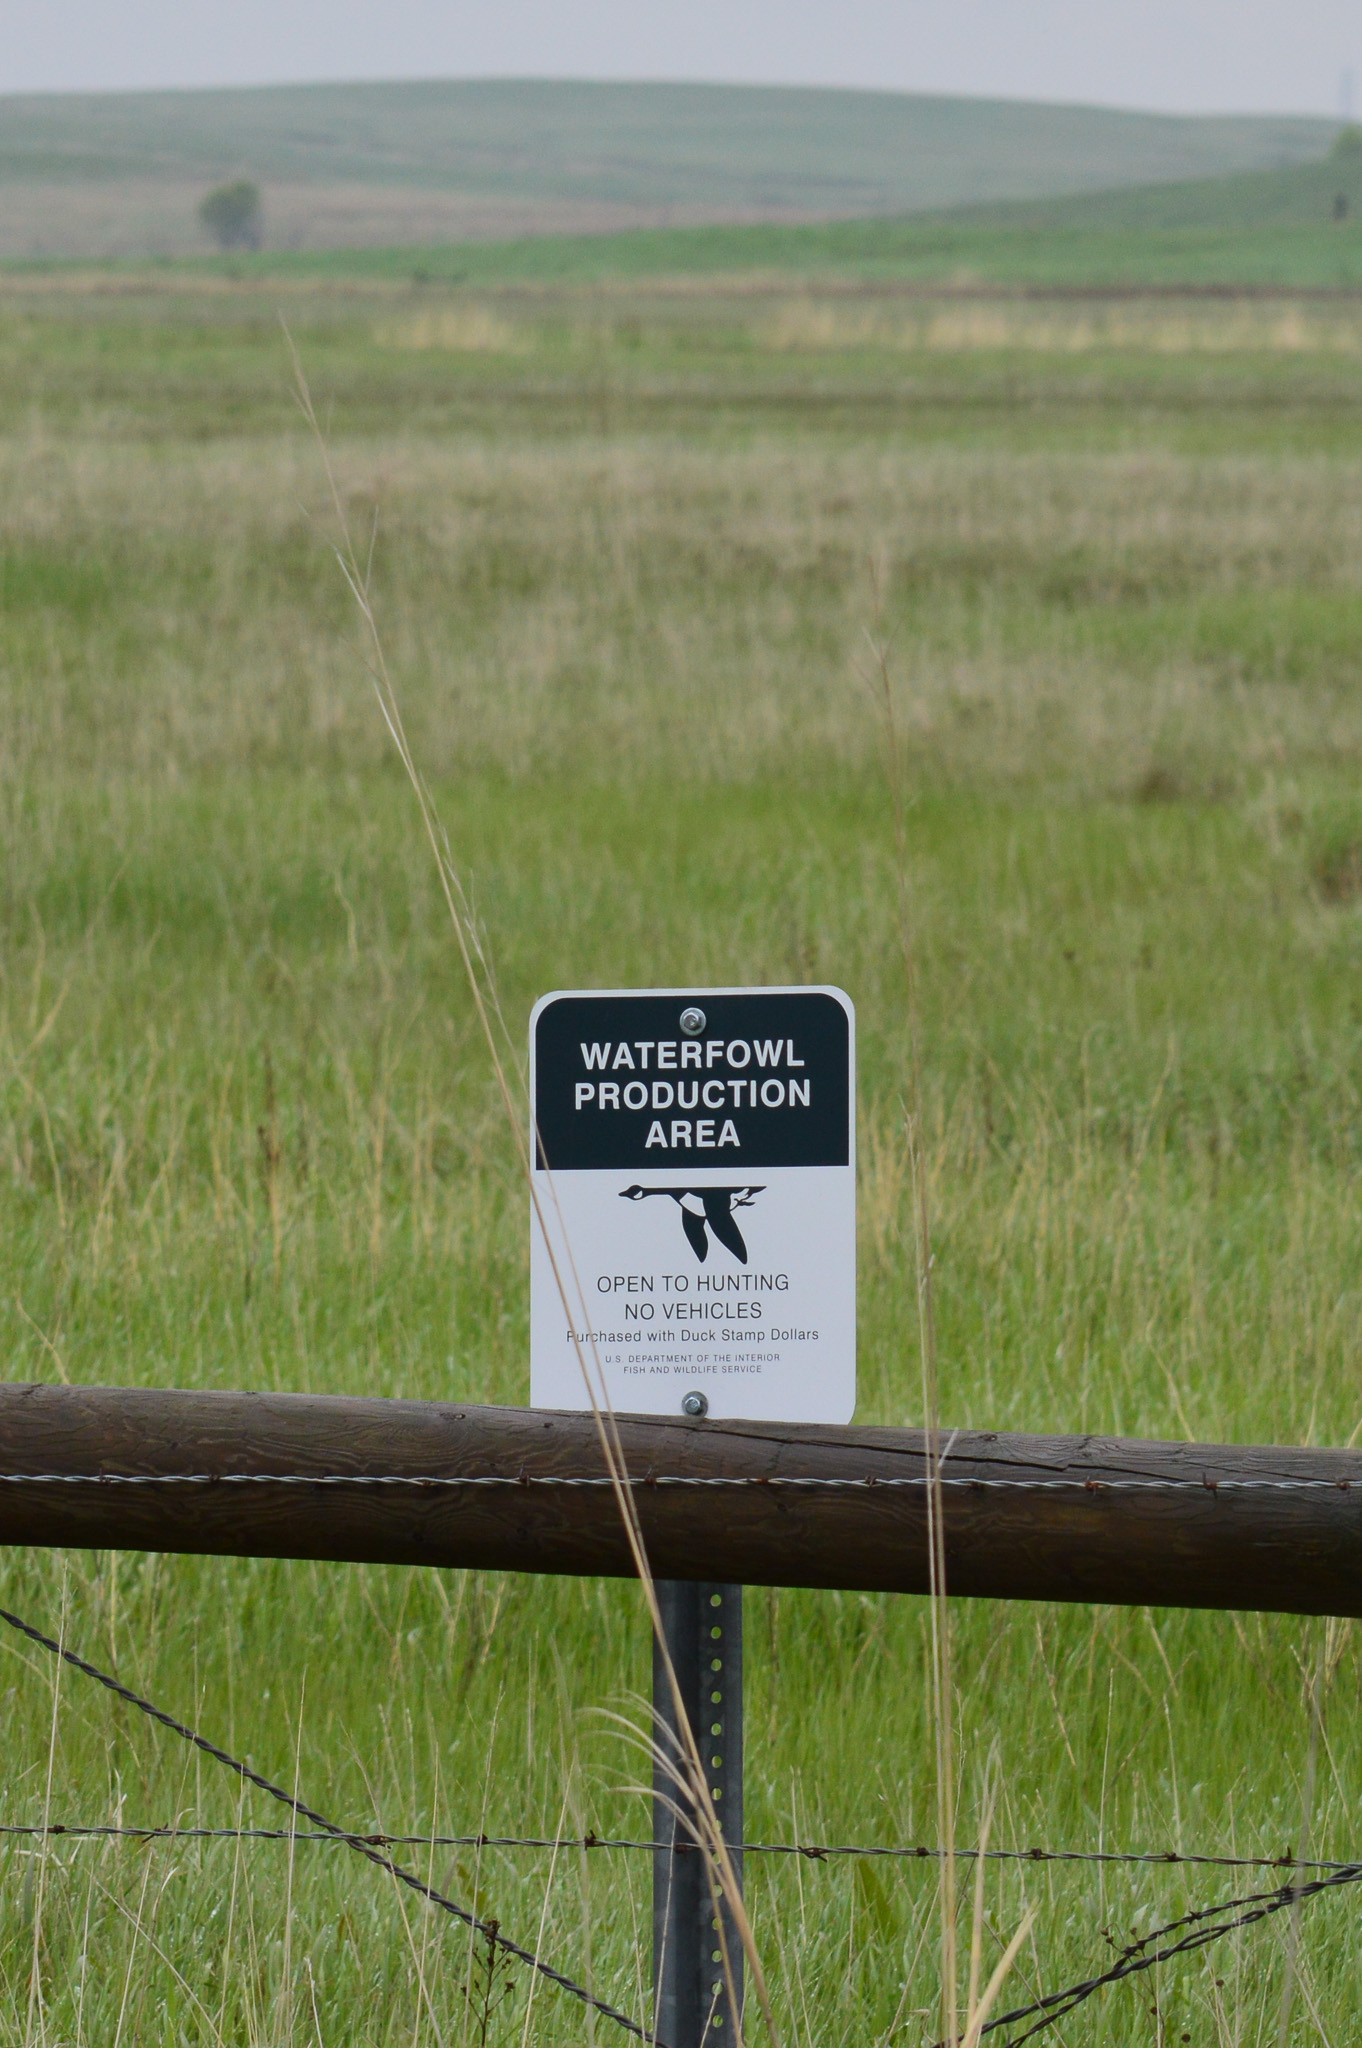 A piece of national wildlife refuge that was purchased with funds from the duck stamp.